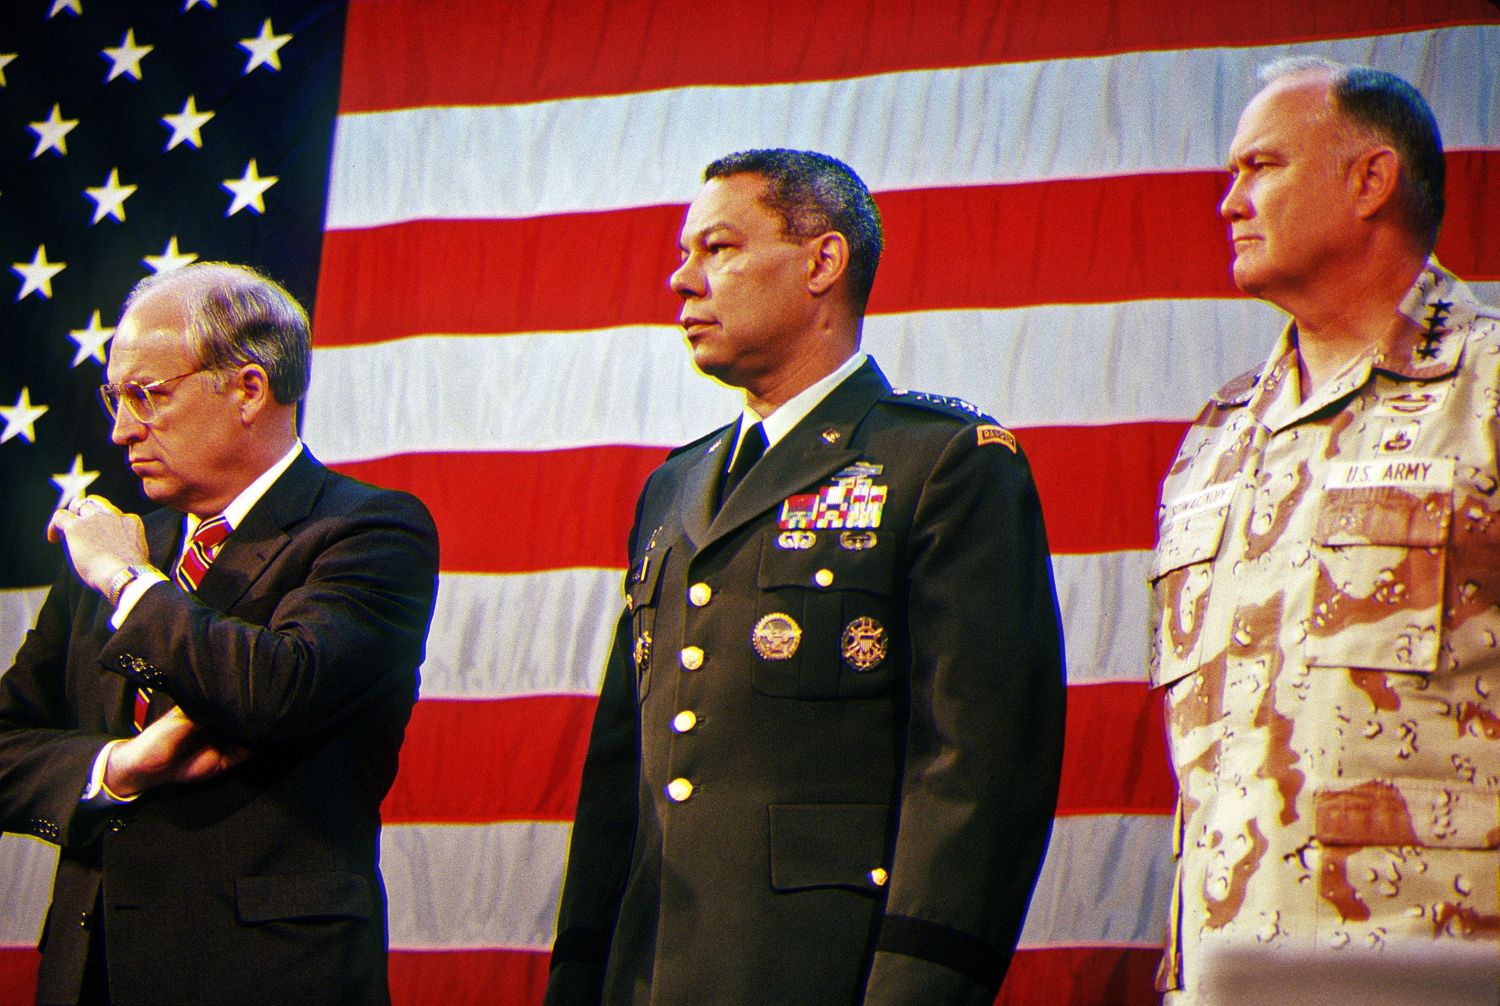 U.S. Secretary of Defense Richard Cheney, General Colin Powell, Chairman Joint Chiefs of Staff and General Norman Schwarzkopf, Commander, U.S. Central Command, stand during an award ceremony prior to the Welcome Home parade honoring the coalition forces of Desert Storm, in an undated file photograph in New York City, U.S. SSgt. Charles Regne/U.S. Army/Handout via REUTERS.